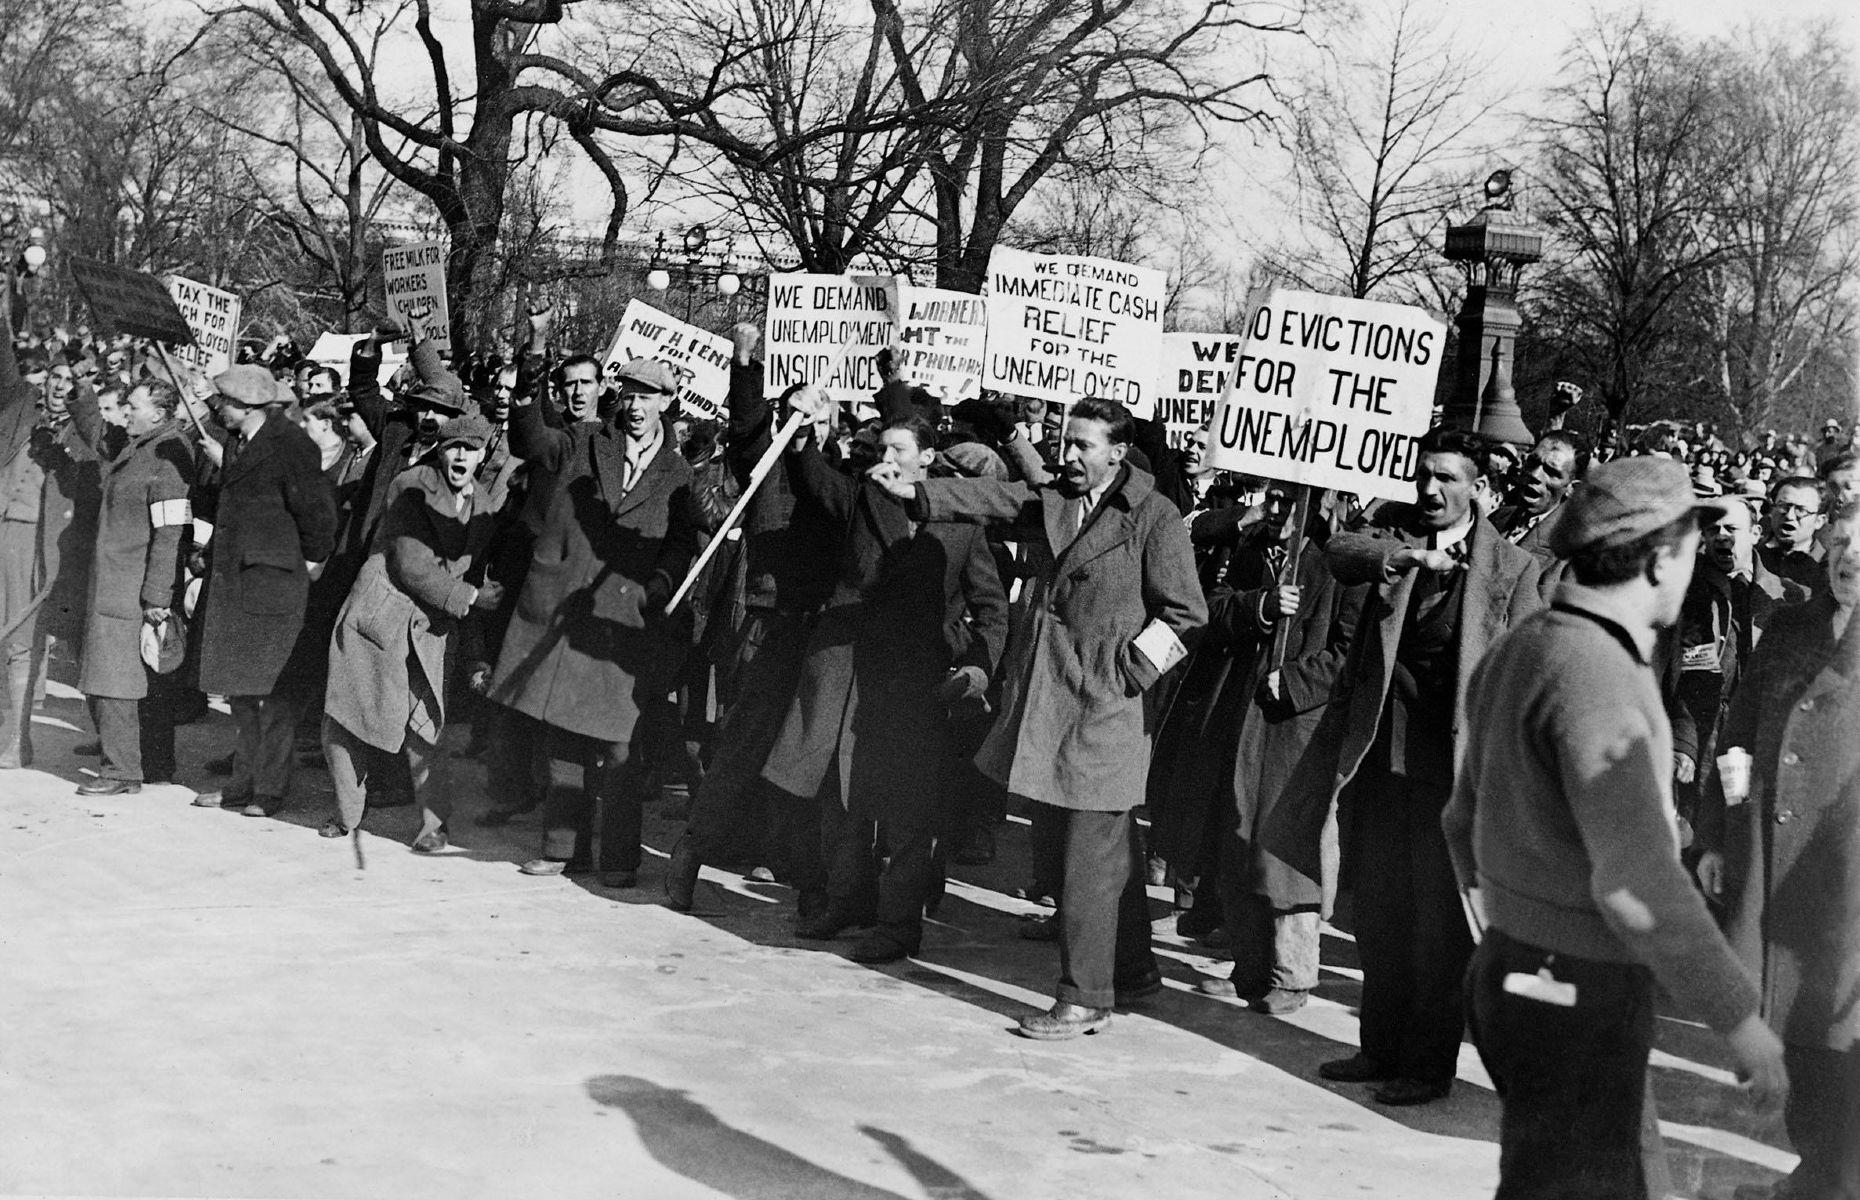 <p>The occasional free meal wasn’t enough for most unemployed workers, who wanted the government to provide more support. In December 1931, 1,670 hunger marchers converged on Washington DC, having set out in four columns from Boston, Buffalo, Chicago, and St Louis.</p>  <p>They insisted that the government provide financial relief and insurance, but political leaders in Congress refused to meet with them and the marchers returned home no better off than when they left.</p>